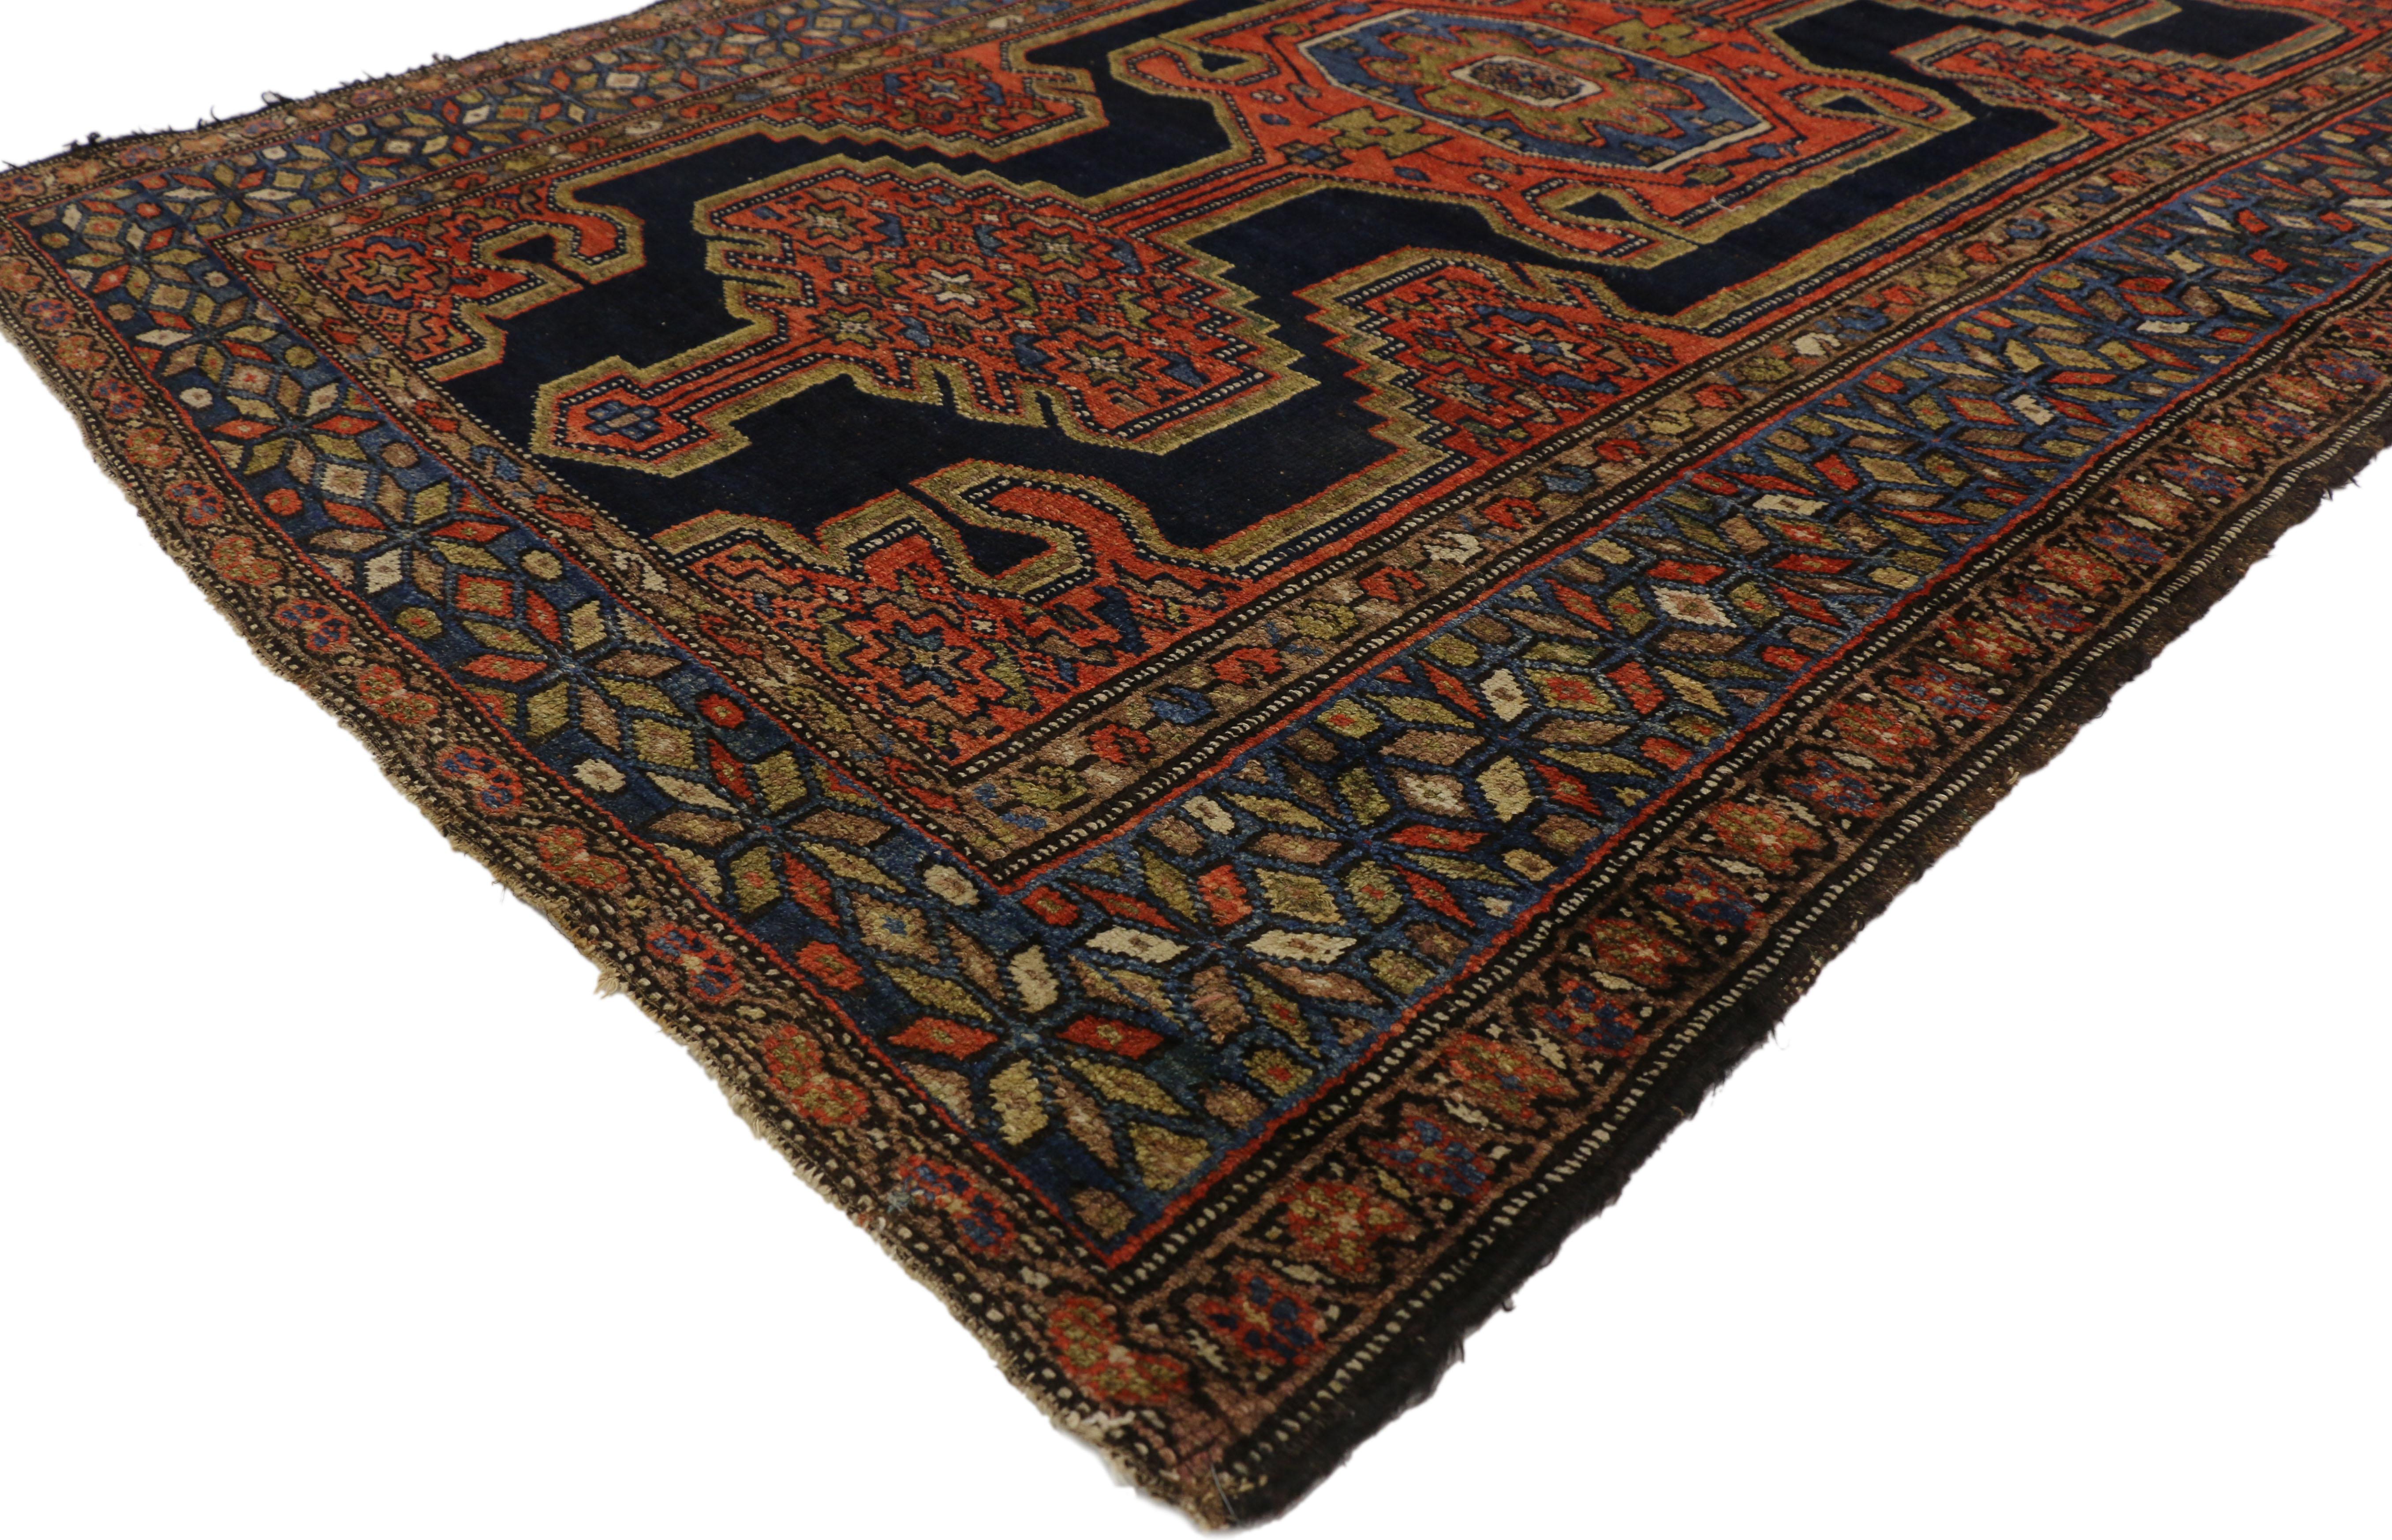 Full of character and stately presence, this antique Persian Hamadan rug with modern tribal style showcases an extravagant geometric design rendered in beautiful variegated shades of navy blue, red, brown and blue. Featuring intrinsic geometric